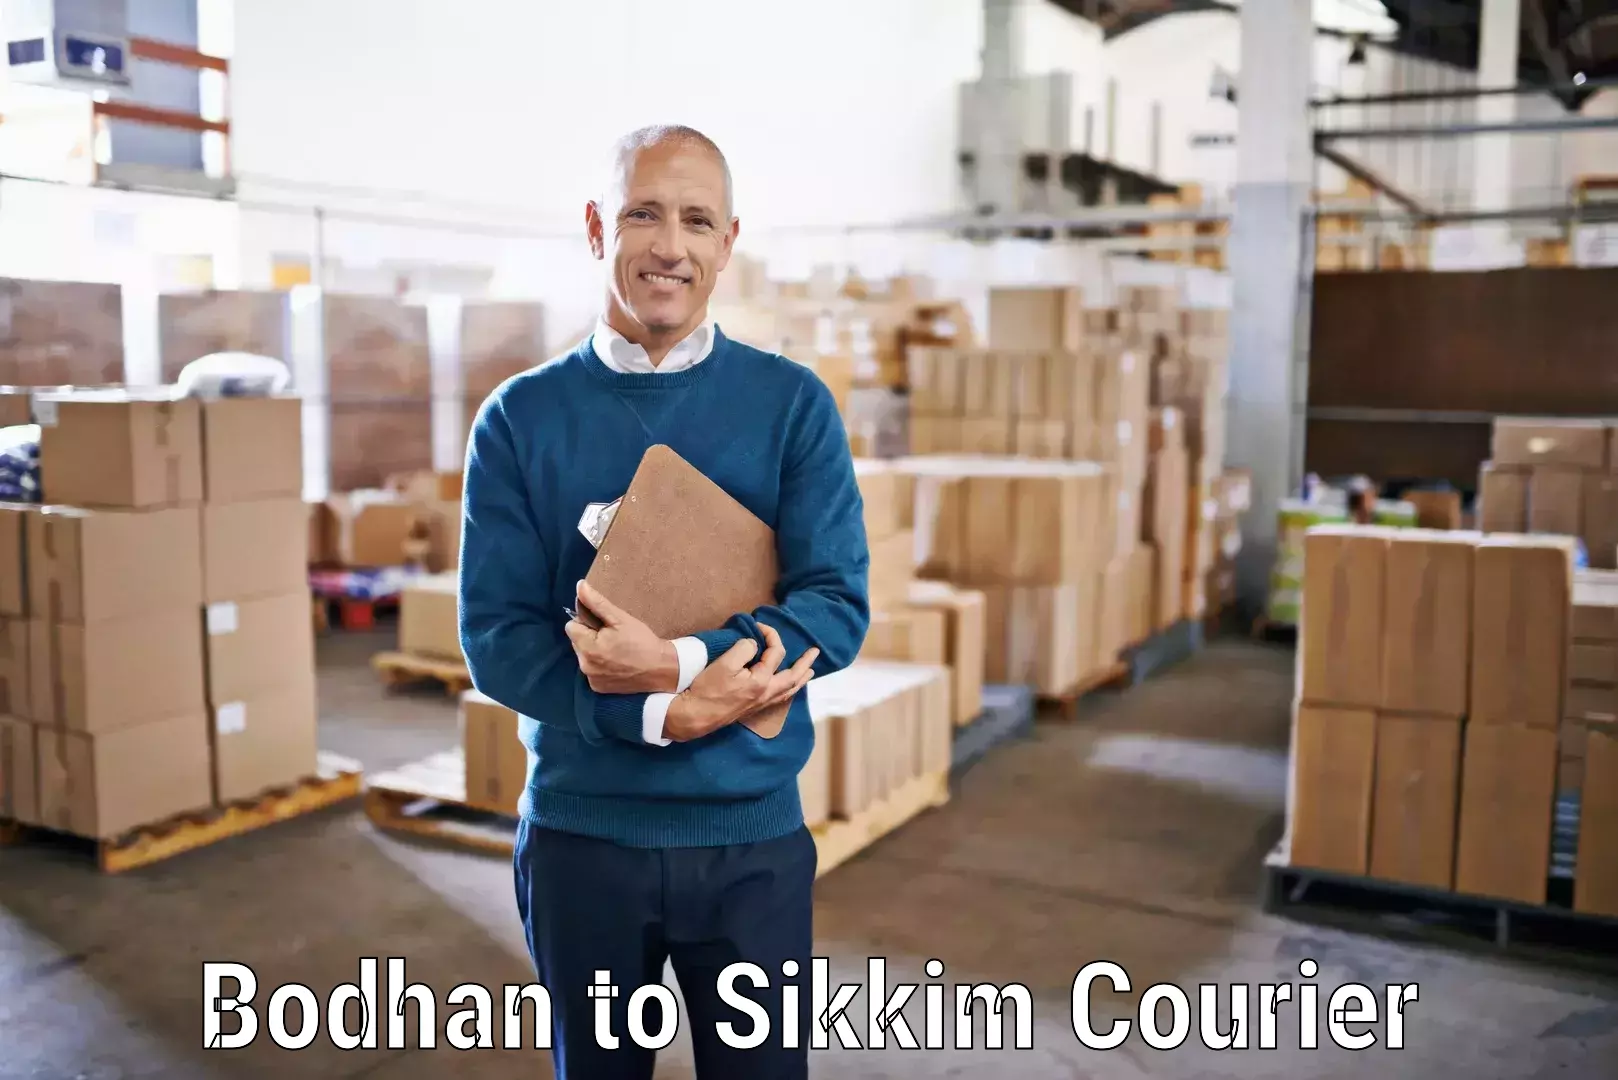 Customer-focused courier Bodhan to Sikkim